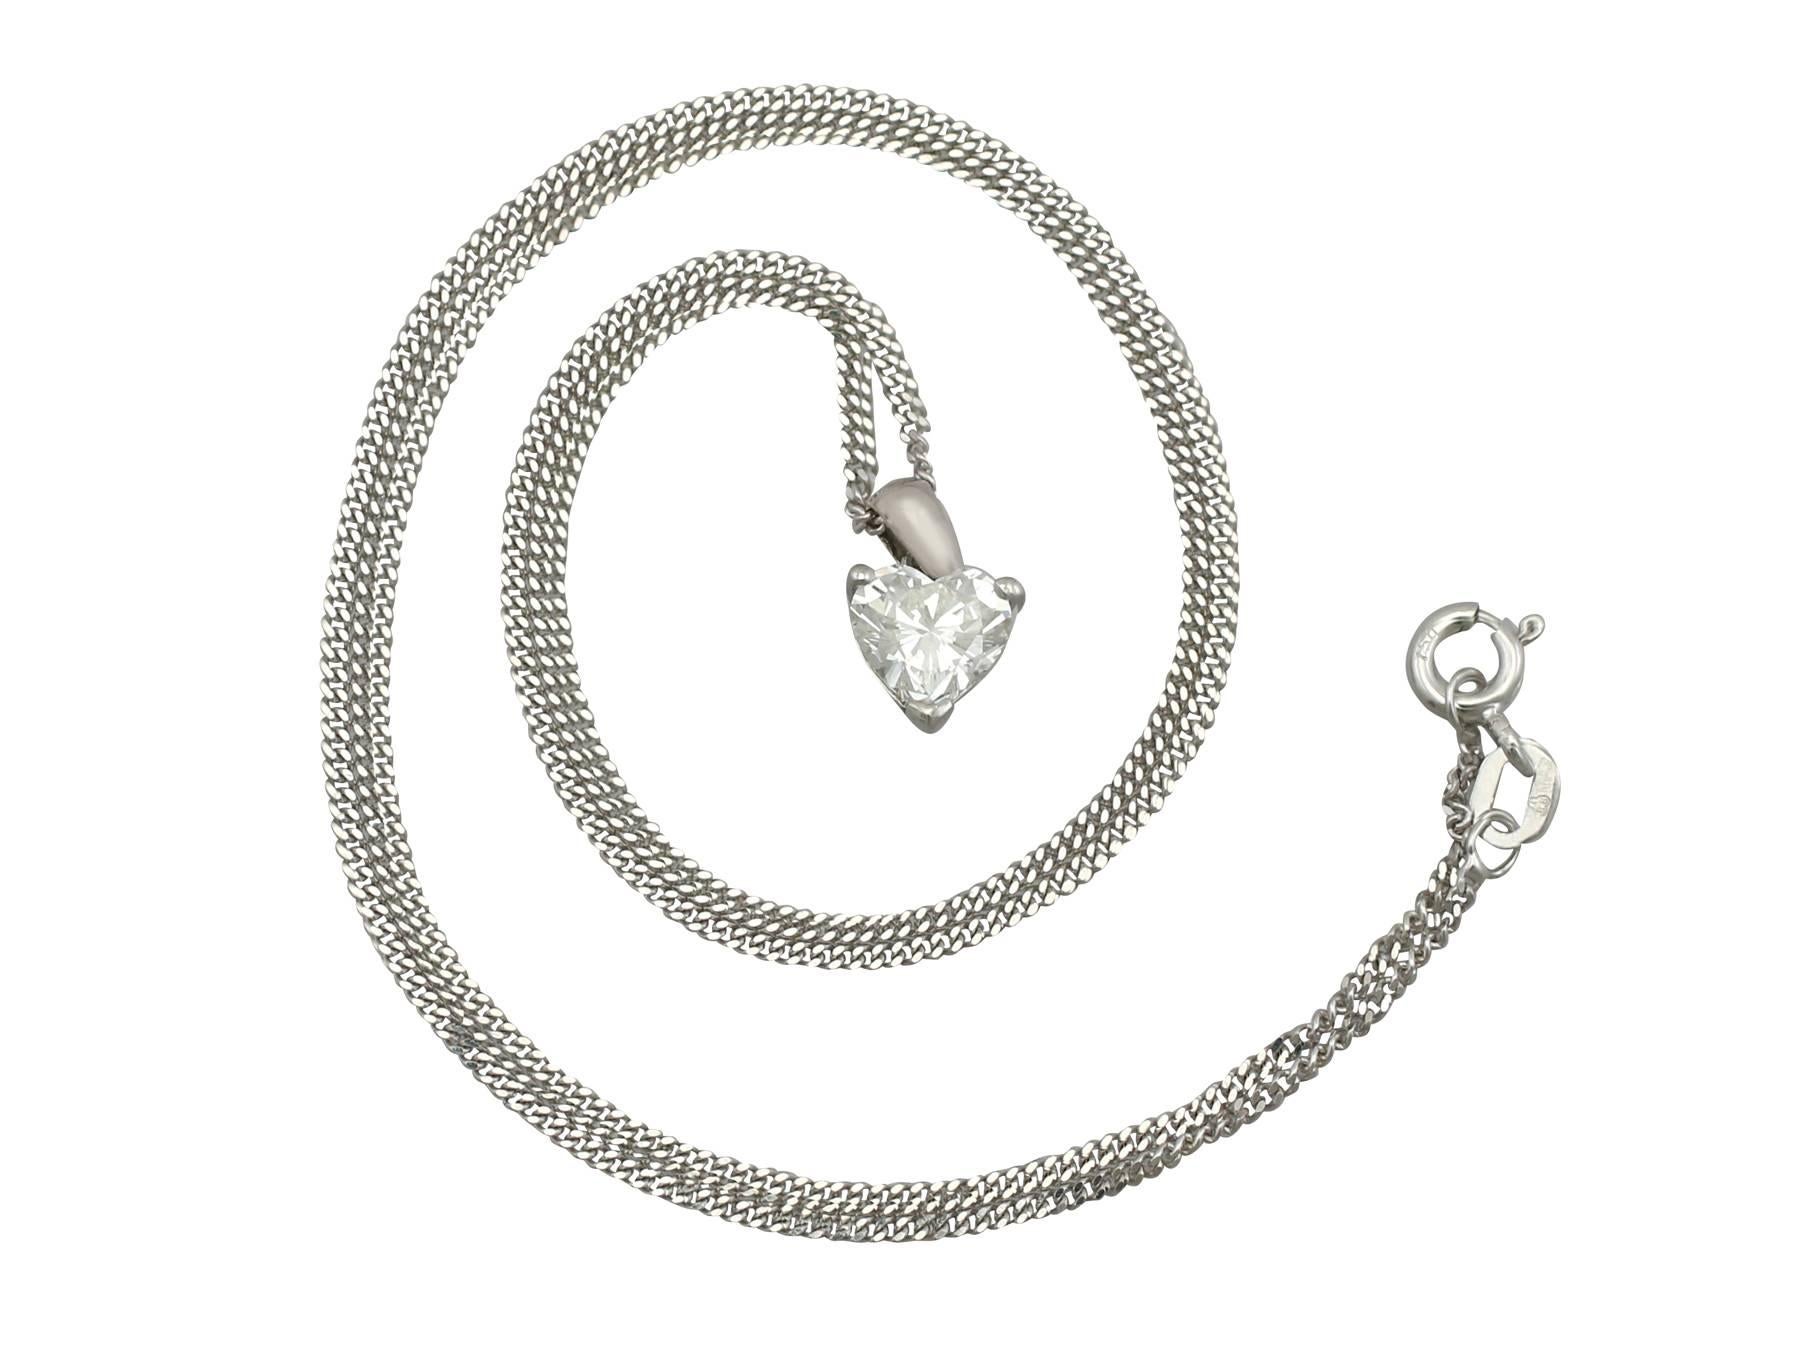 A fine and impressive vintage 1.03 carat diamond and 18 karat white gold 'heart' pendant; part of our diverse diamond jewelry and estate jewelry collections.

This fine and impressive heart shaped diamond pendant has been crafted in 18k white